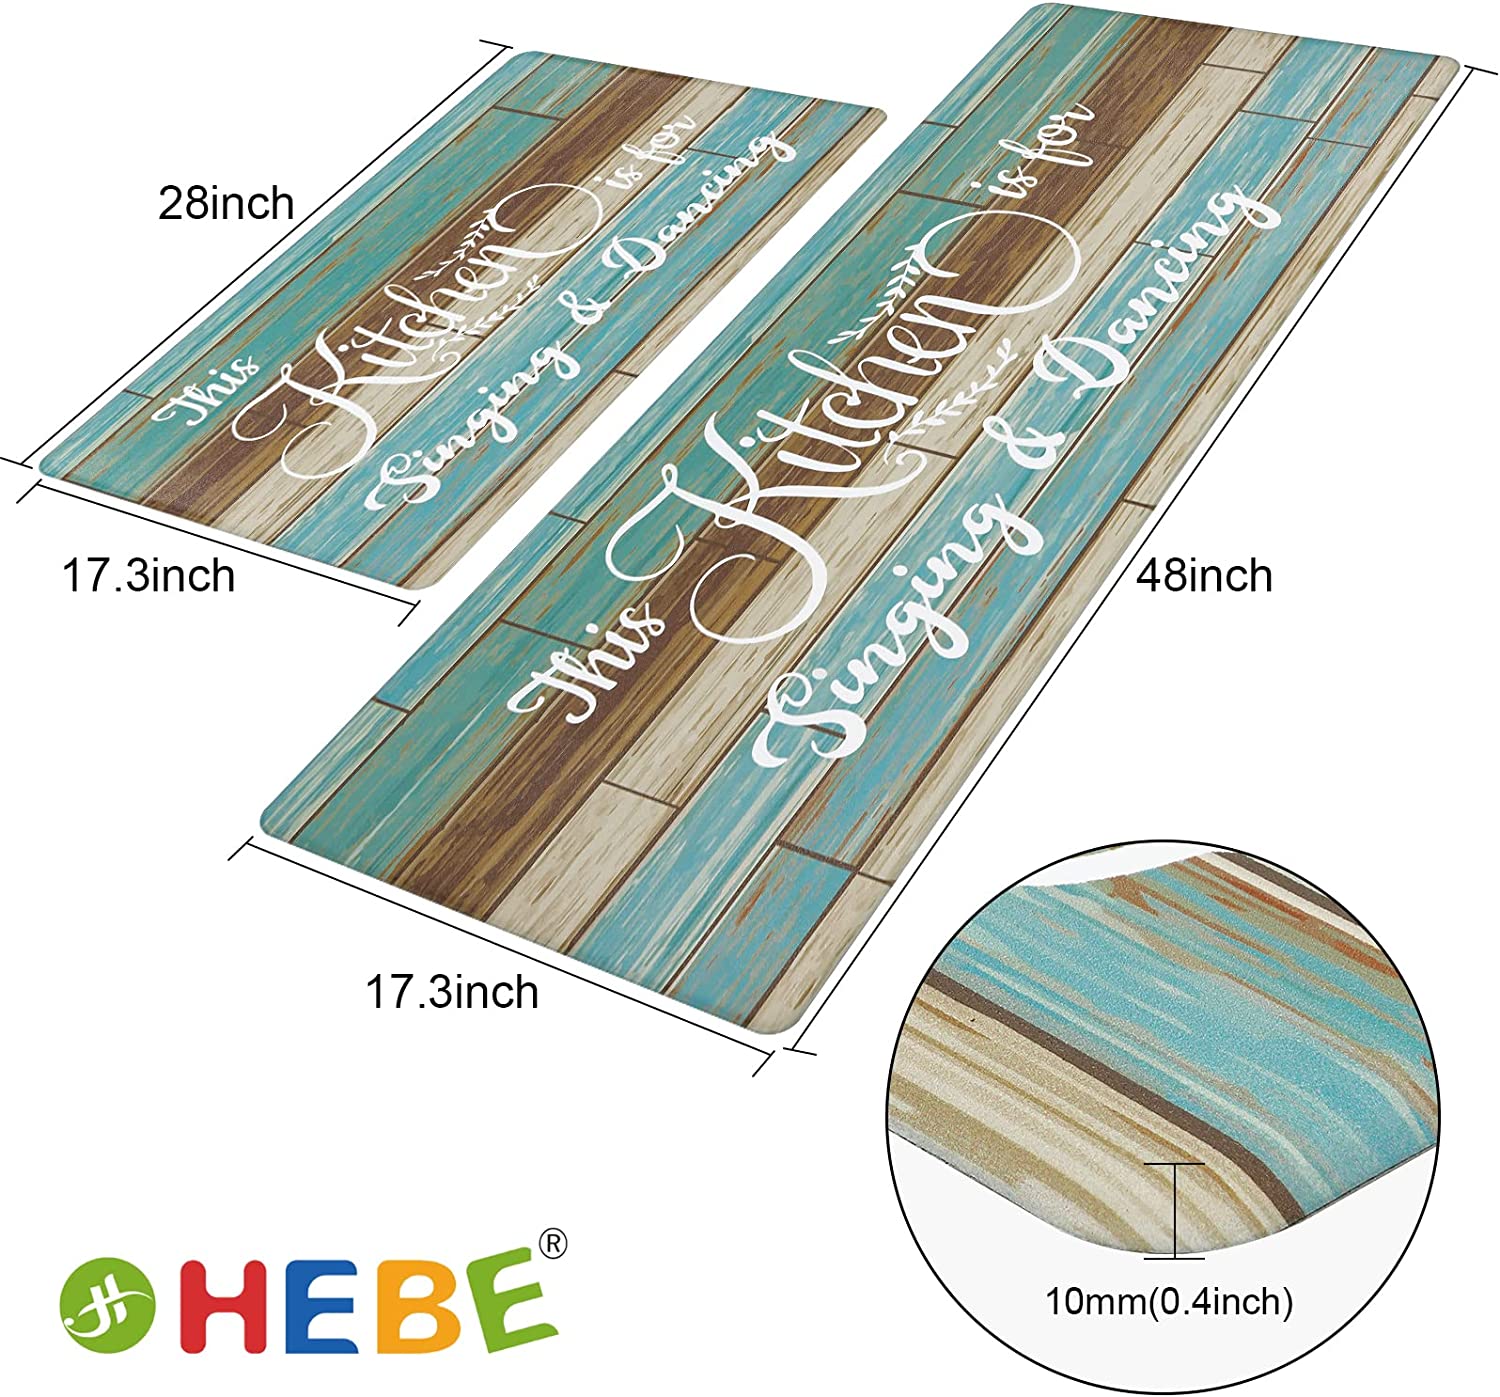 Hebe Oversized Anti Fatigue Comfort Mats Waterproof Heavy Duty 20x60 Inches Brown New